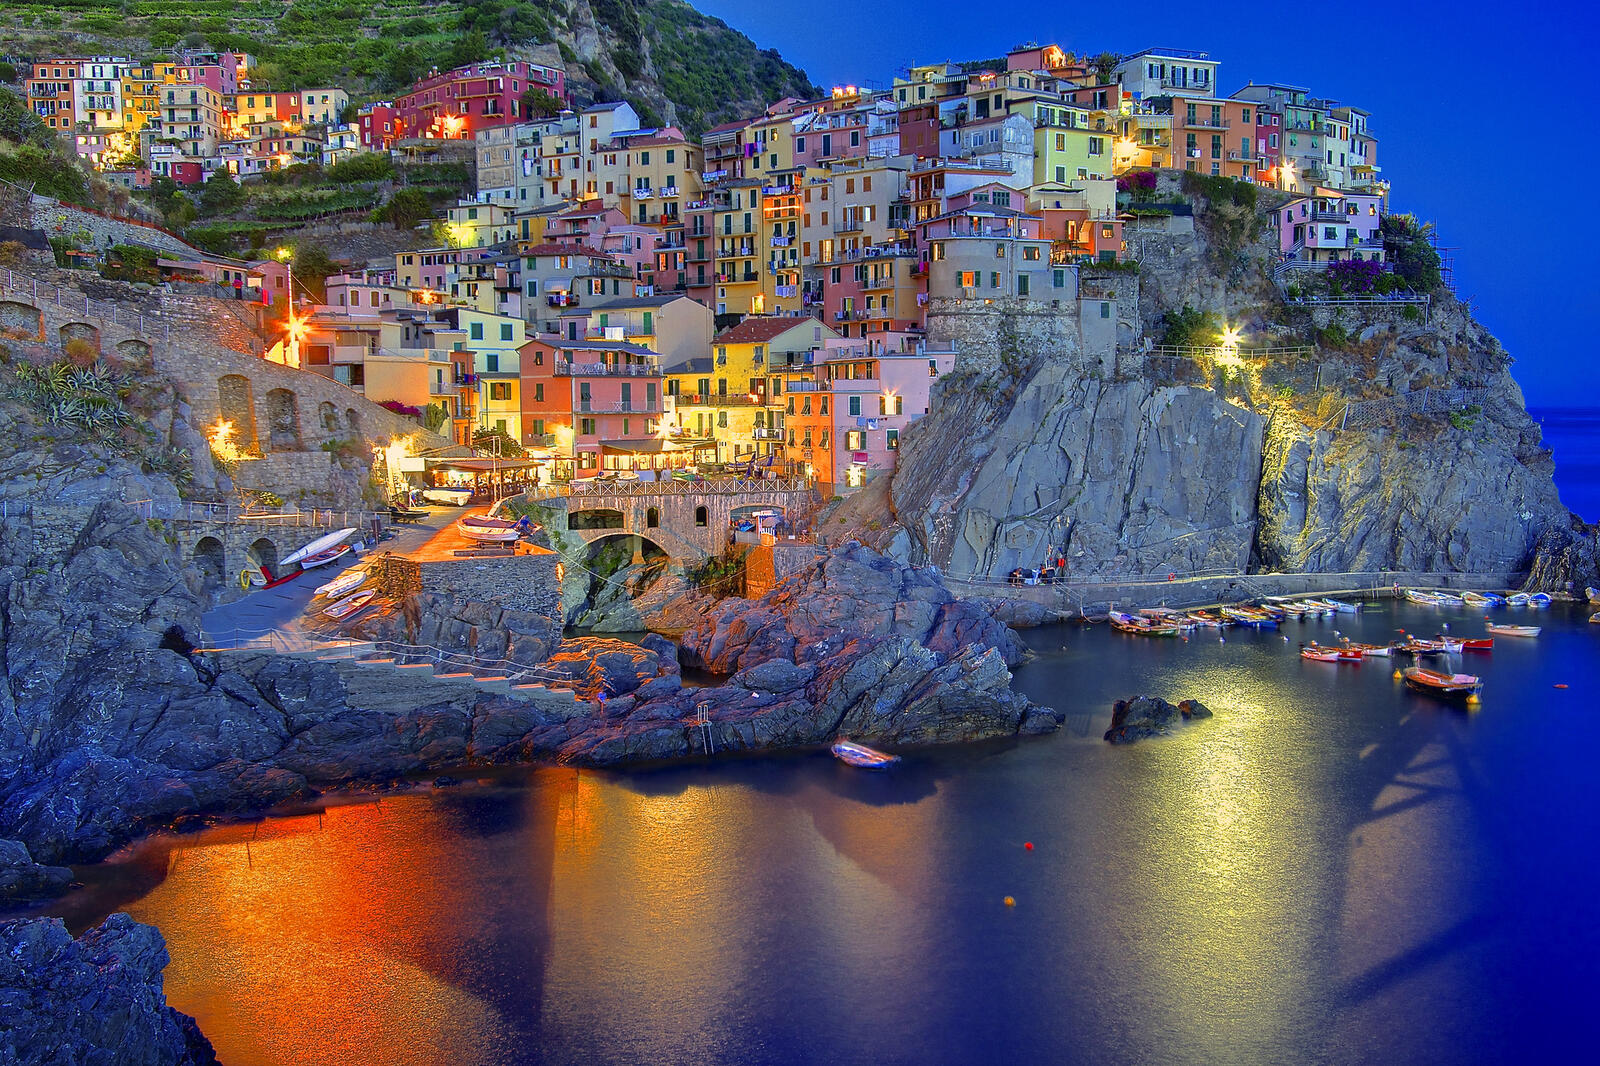 Wallpapers night lights Cinque Terre Italy on the desktop